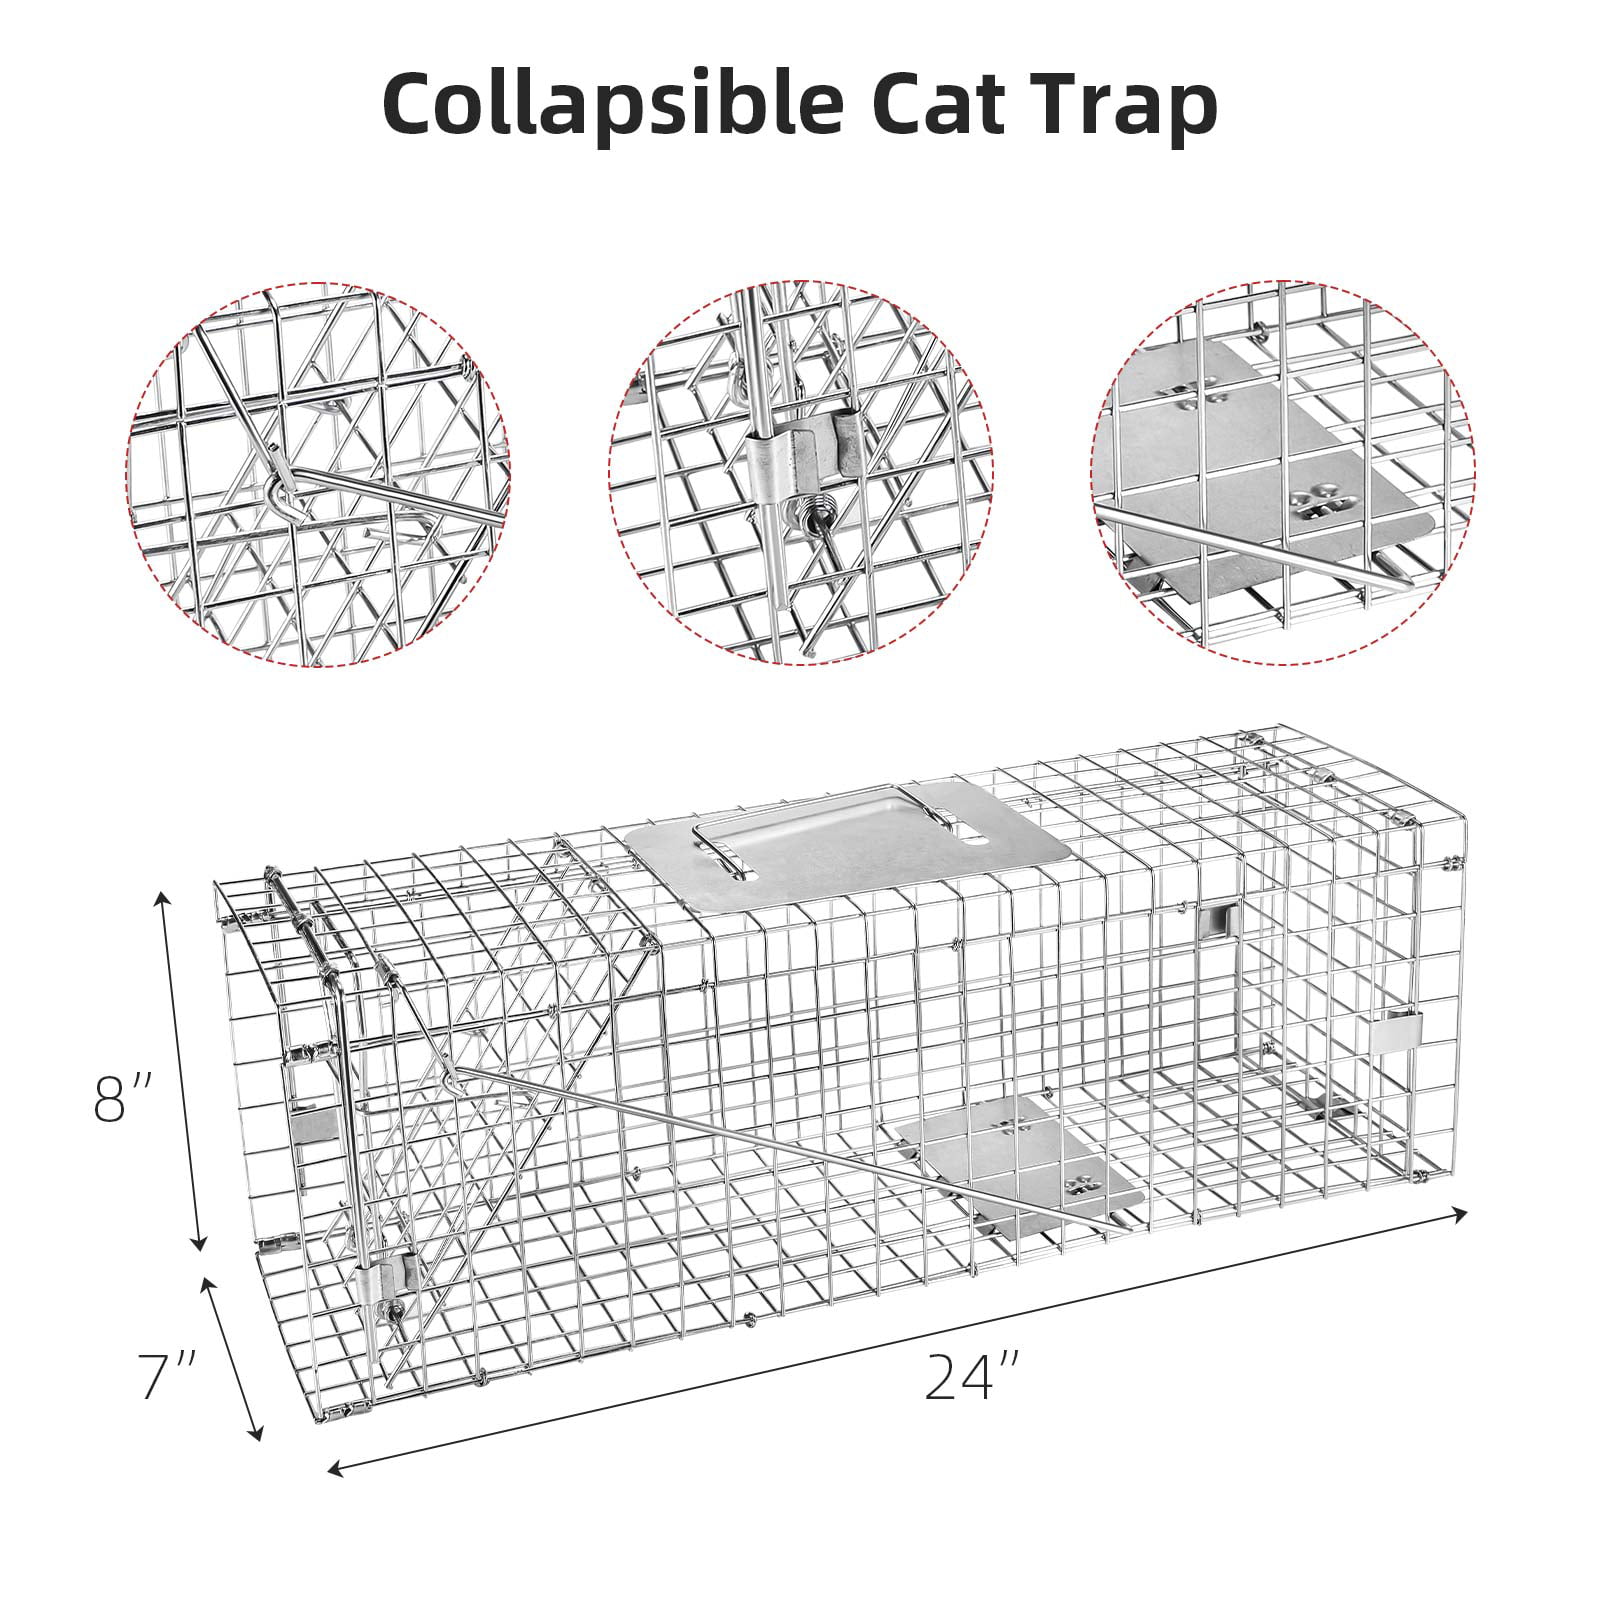 Large Animal Trap Cat Trap for Stray Cats Humane,Small  Dogs,Fox,Rabbit,Groundhog,Squirrel,Raccoon,Chicken,Opossum, 32inch Live  Traps for Animals